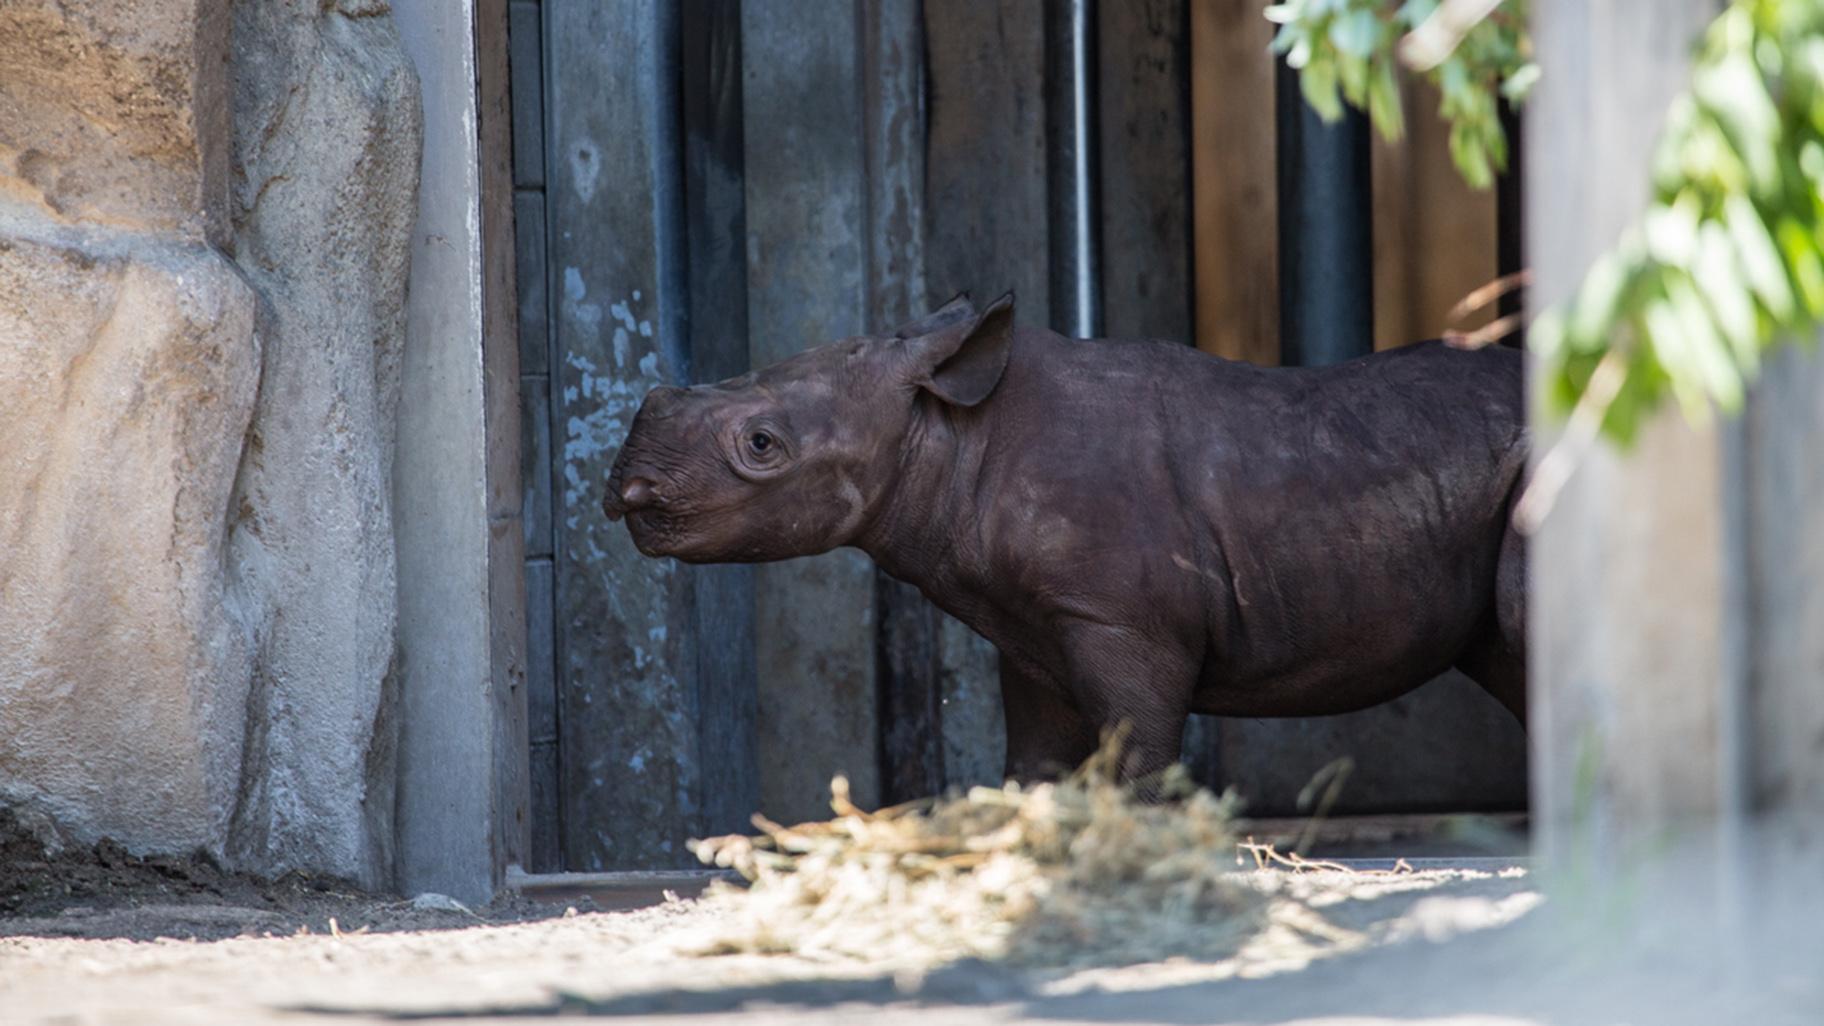 A yet-to-be-named black rhino calf debuted June 19 at Lincoln Park Zoo. (Christopher Bijalba / Lincoln Park Zoo)